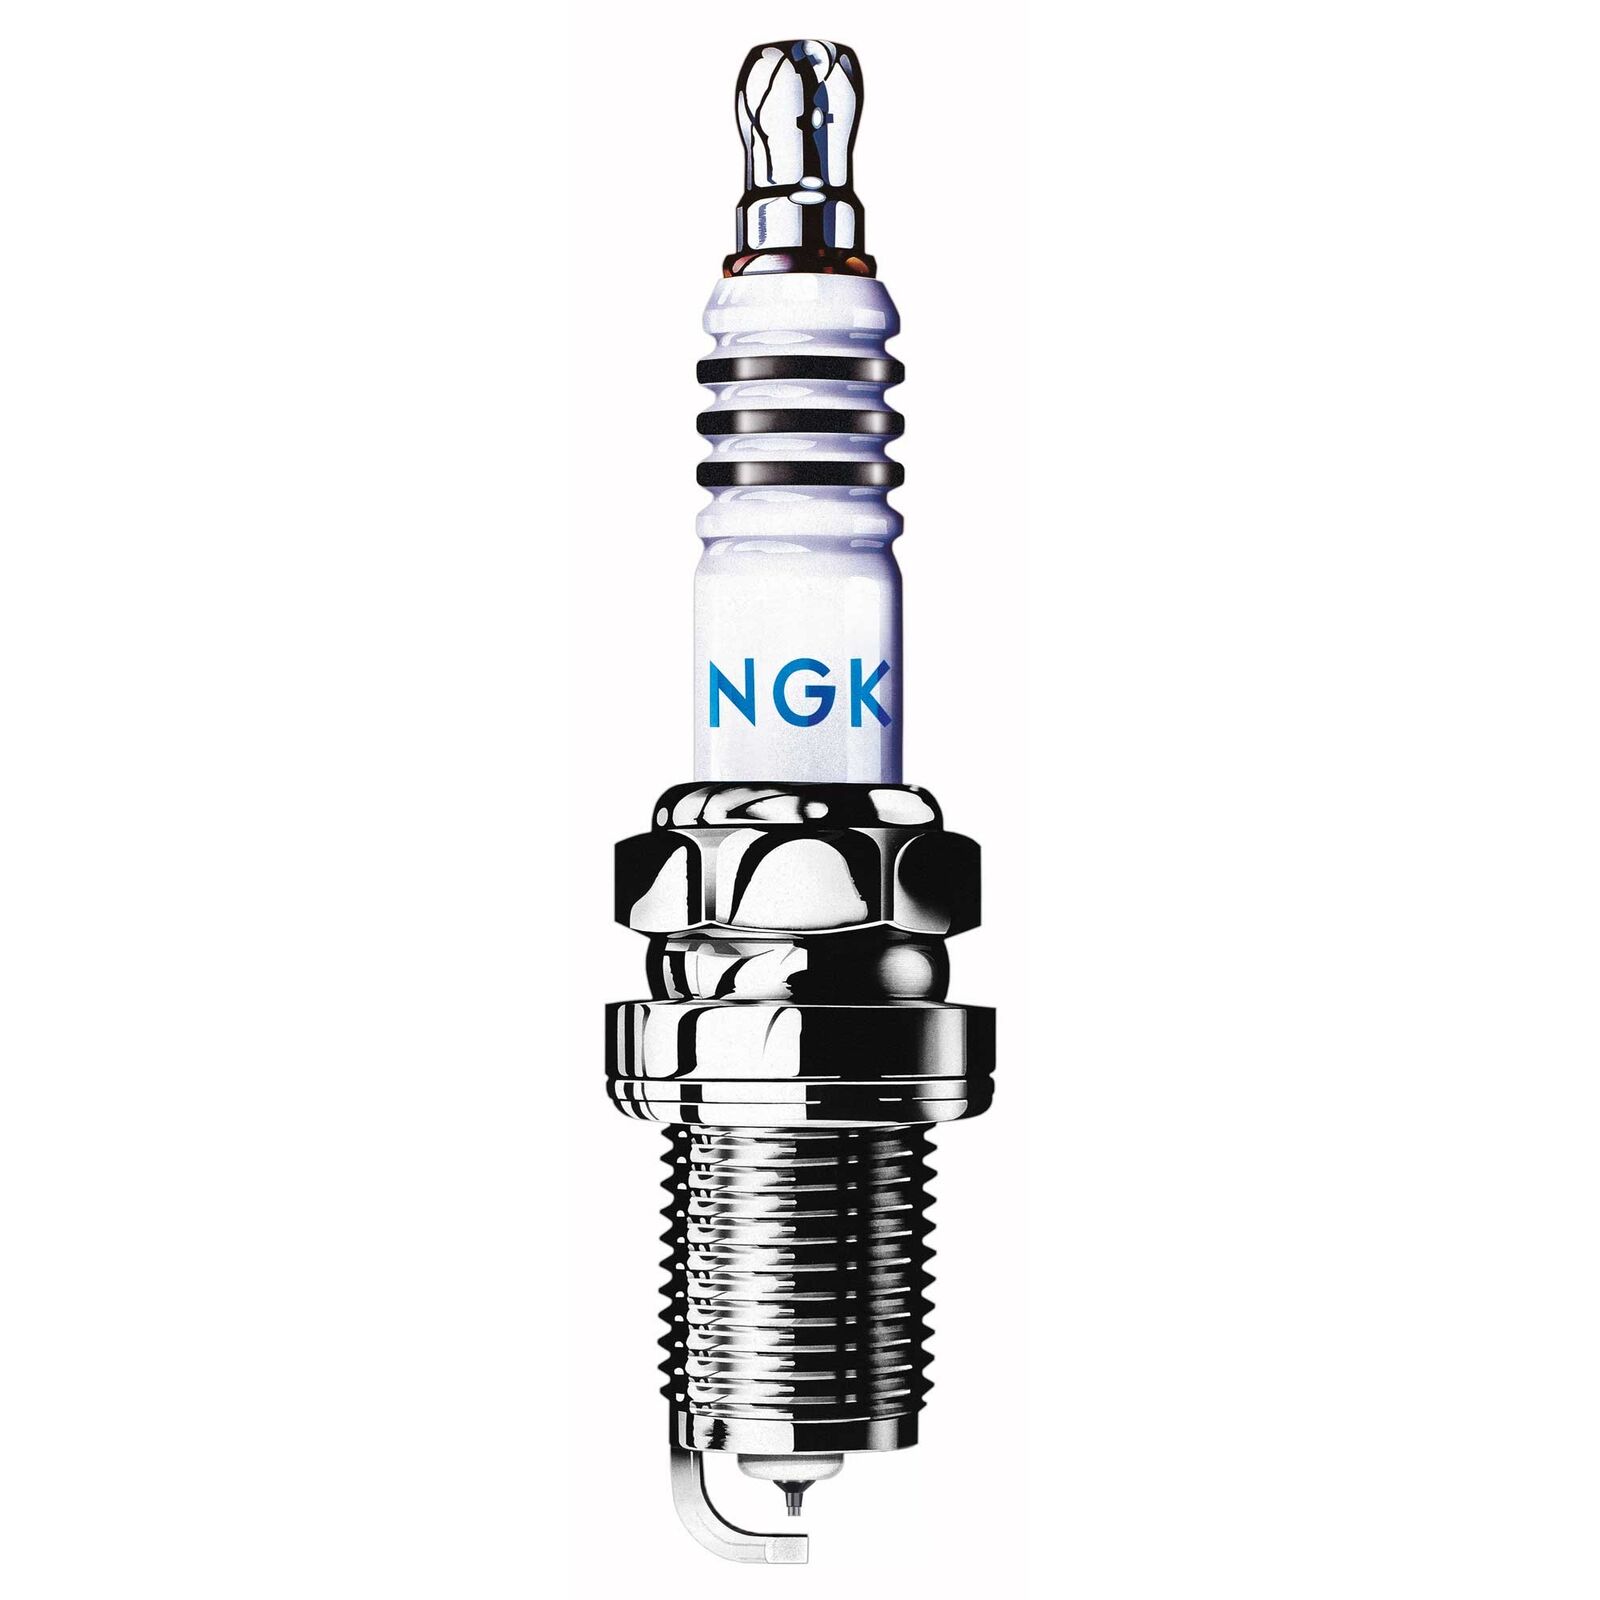 NGK Copper Core Motorbike Spark Plugs Suitable For Kawasaki ZRX1200S B2 2002